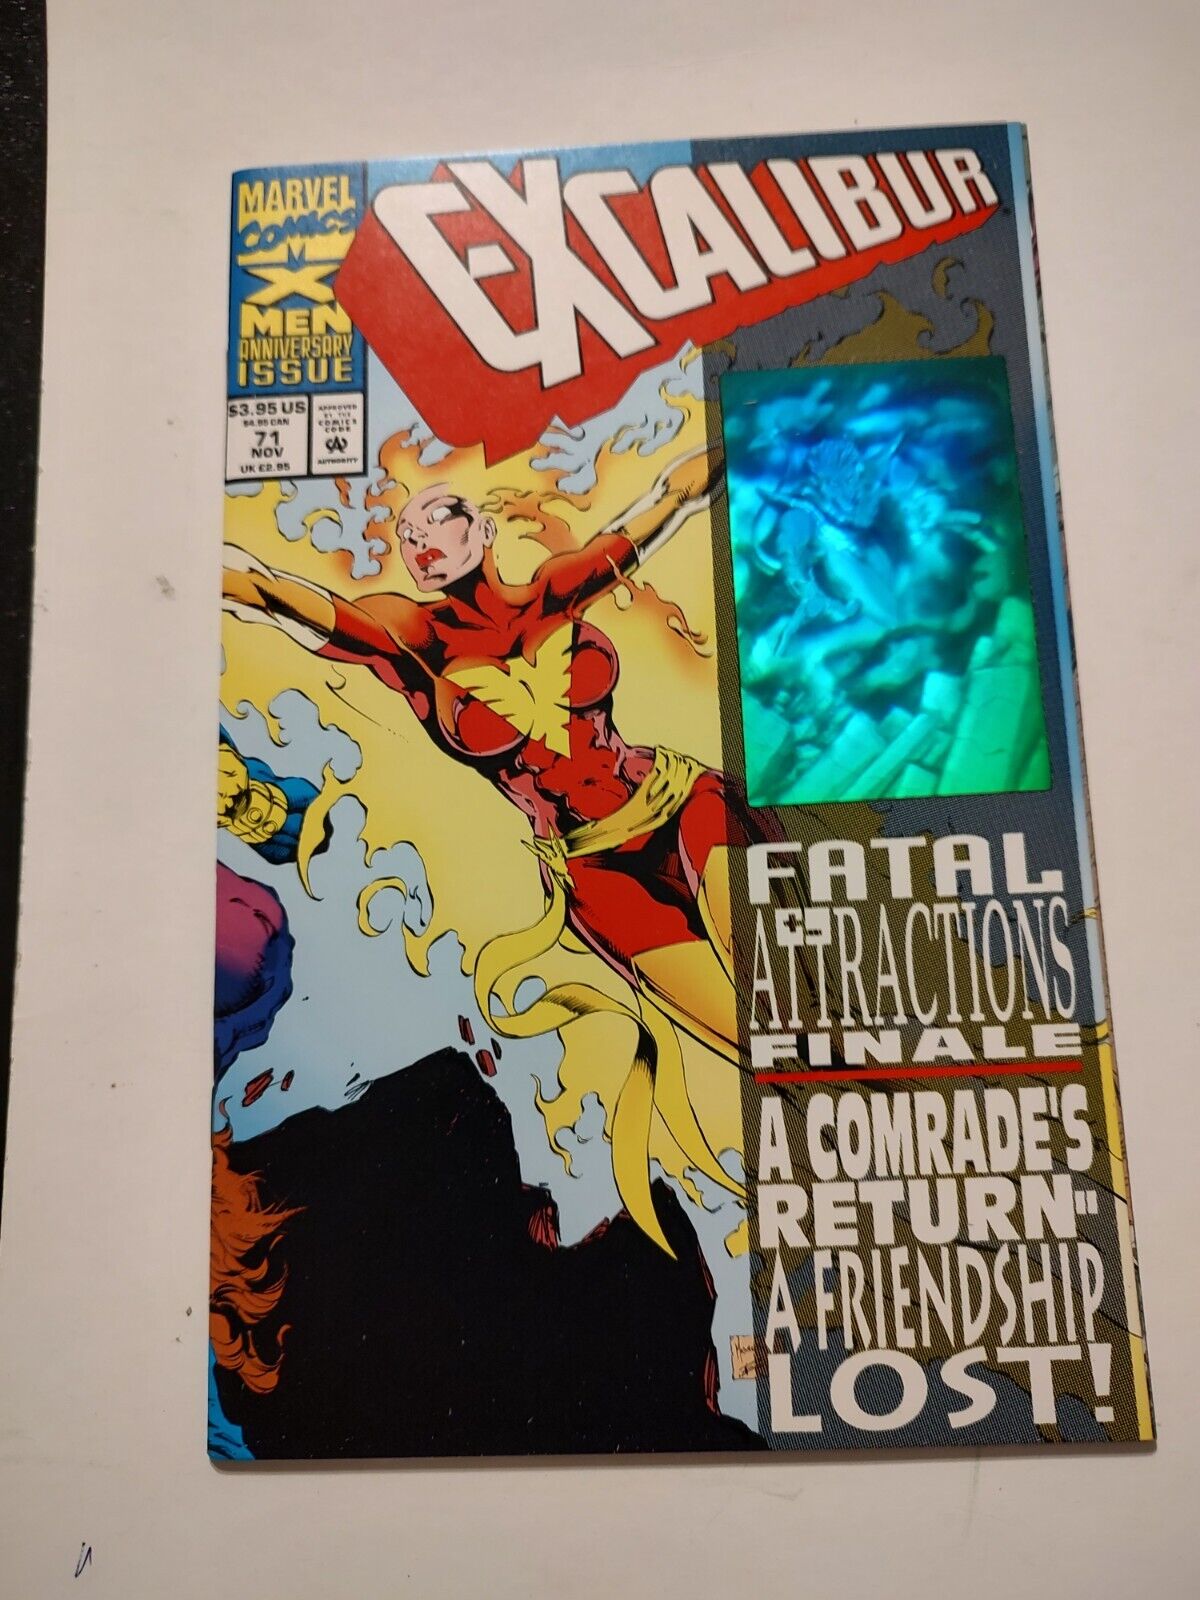 EXCALIBUR # 71 FATAL ATTRACTIONS PART 6 WRITTEN BY SCOTT LOBDELL HOLOGRAM COVER